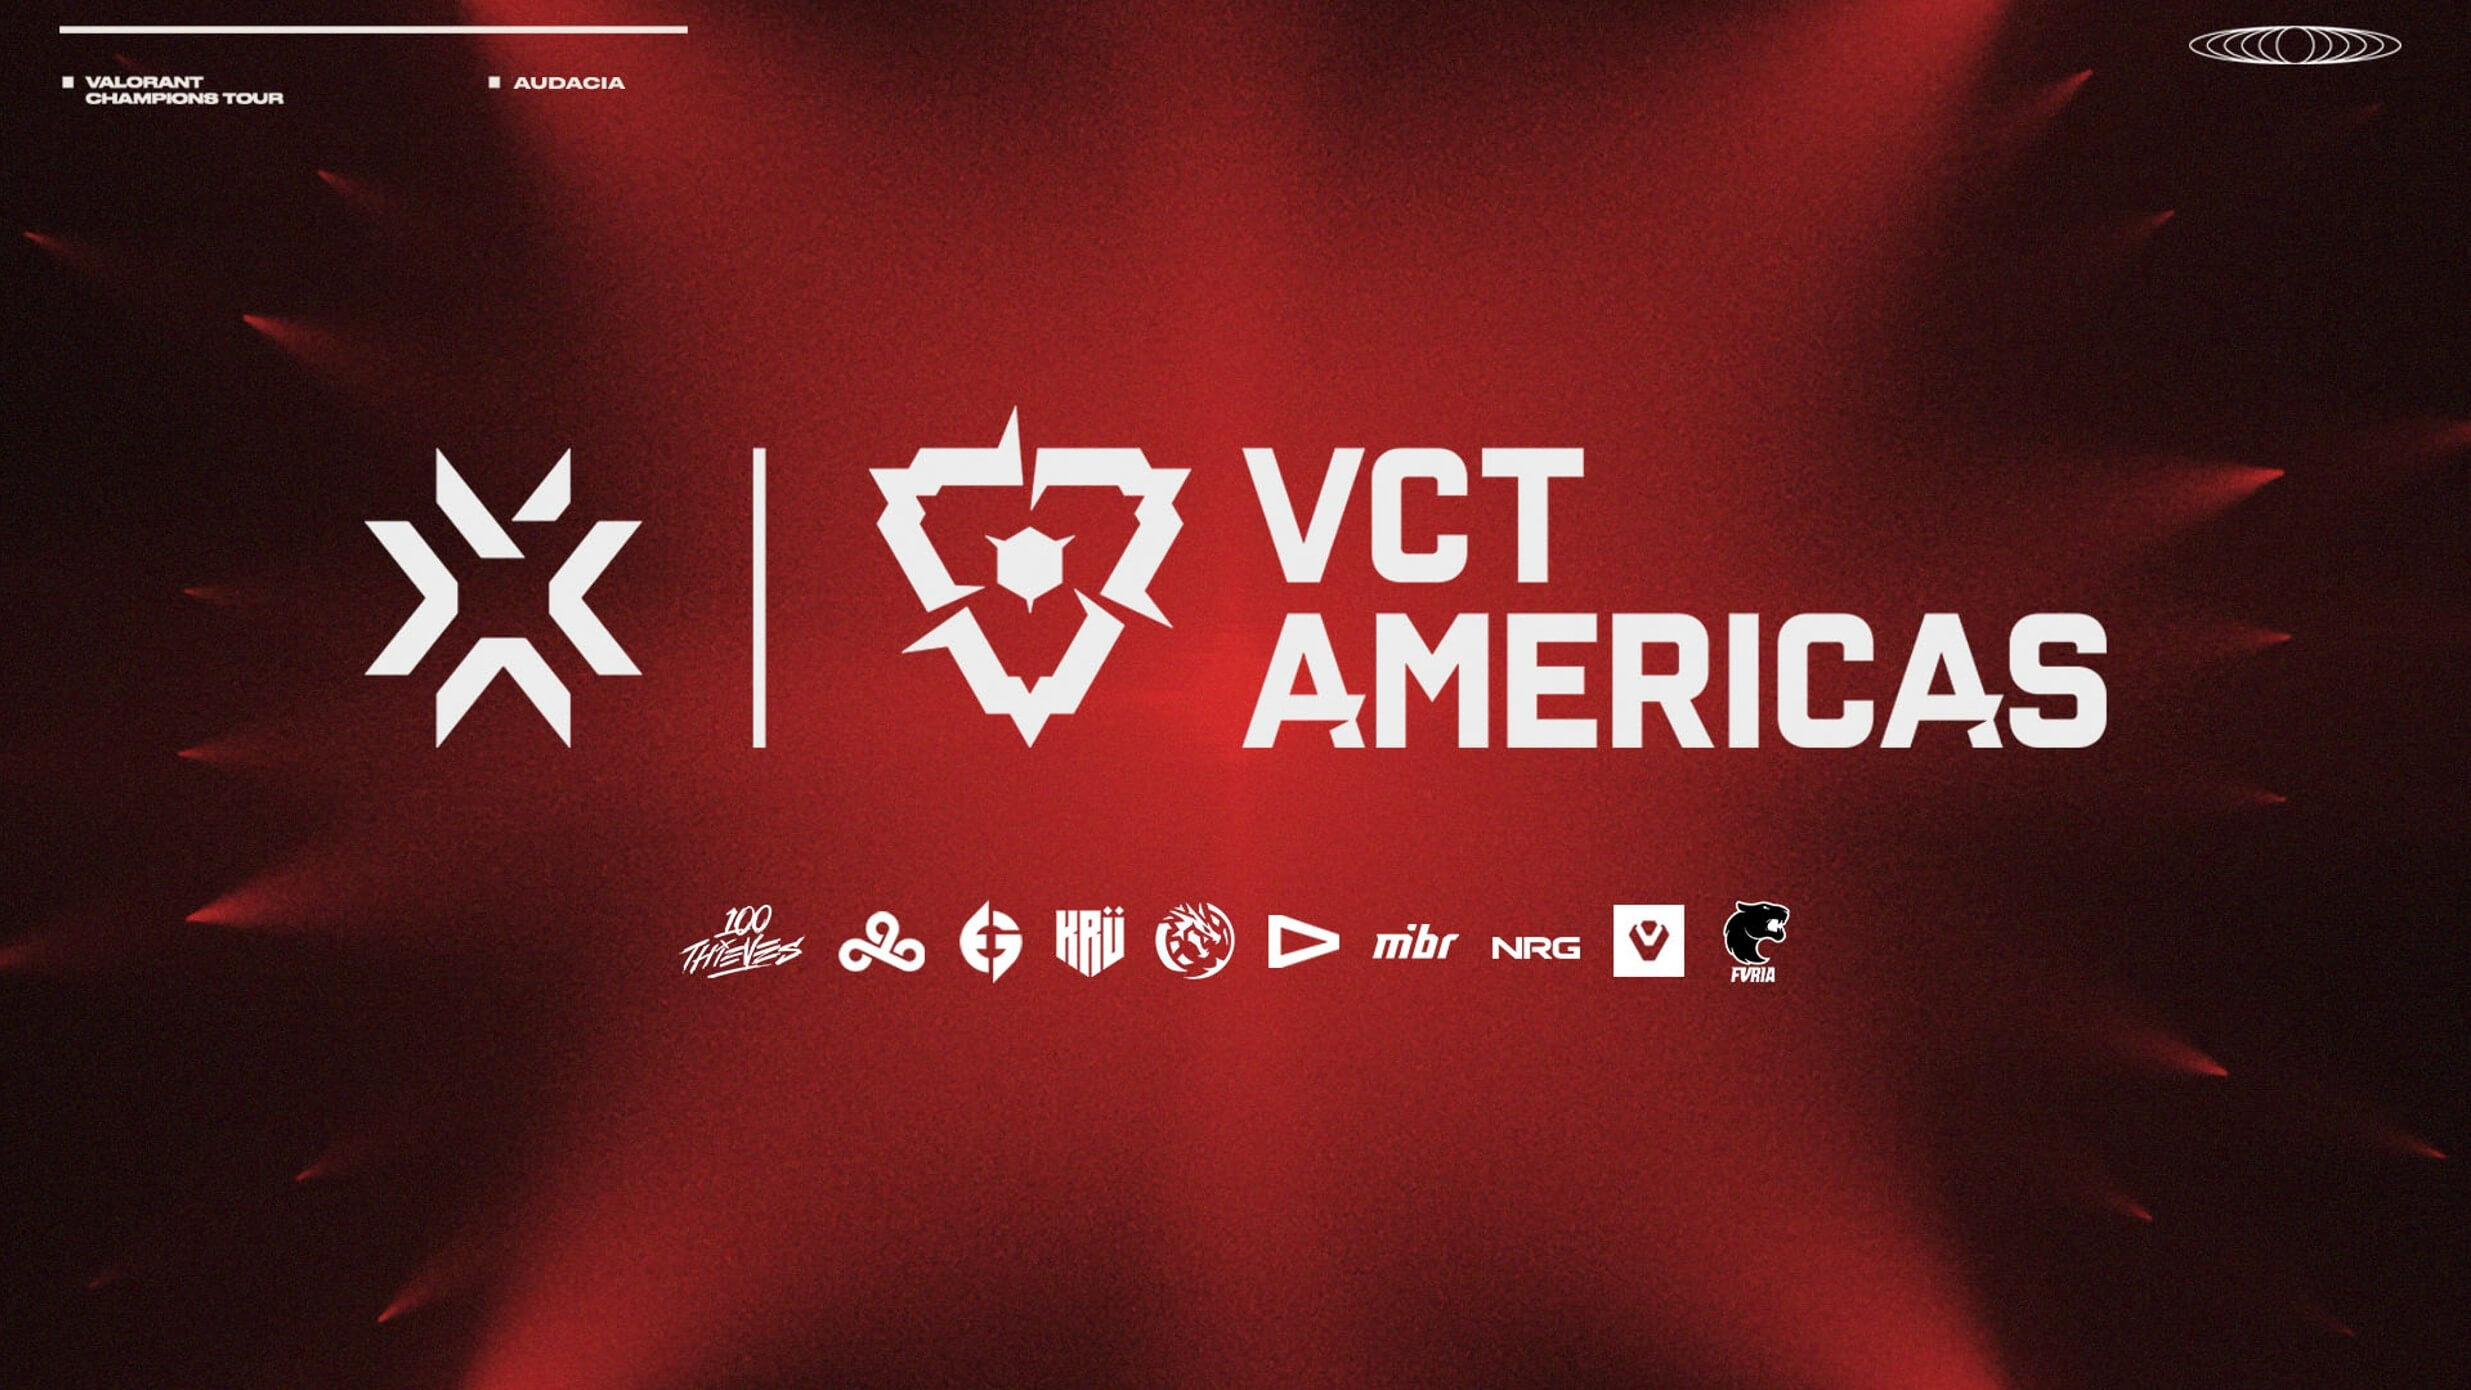 Due to production difficulties, VCT Americas has been the subject of much criticism